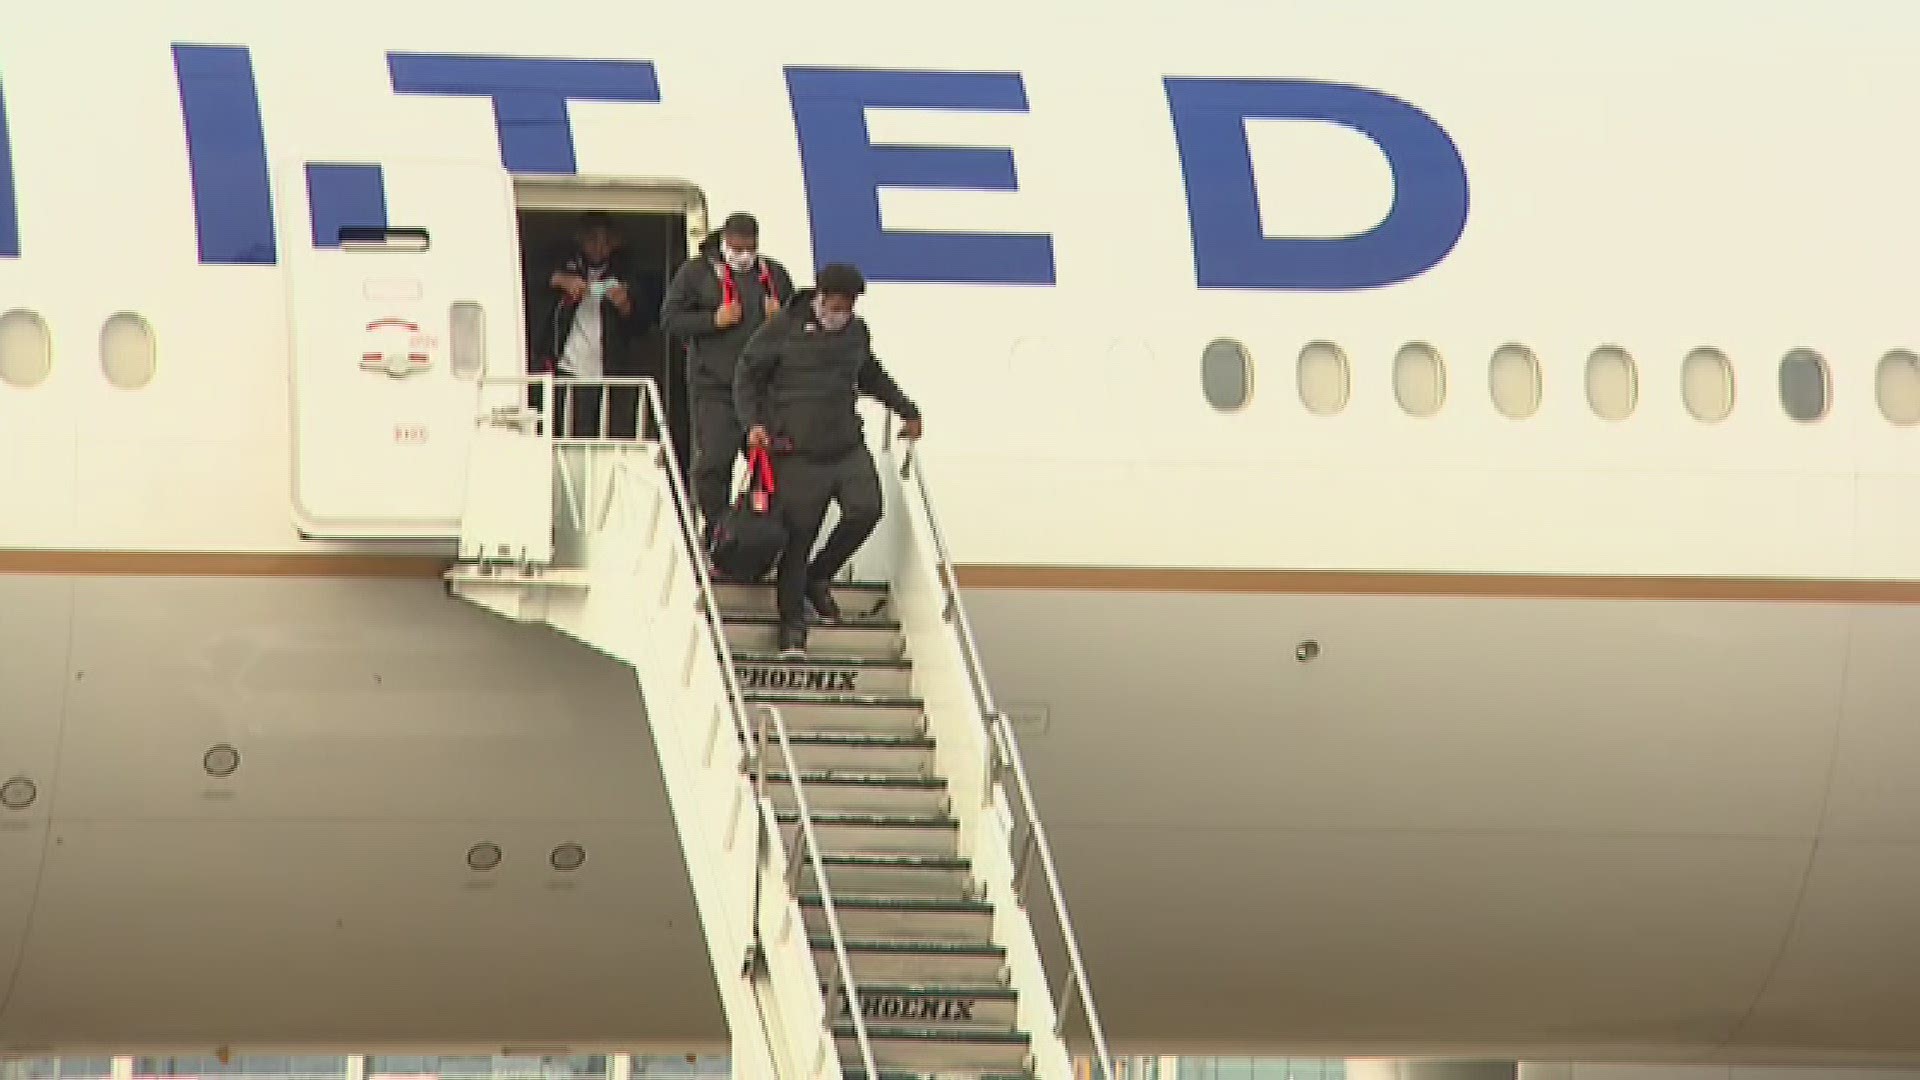 The Ohio State Buckeyes have landed in New Orleans where they will take on the Clemson Tigers in the Sugar Bowl Friday night.